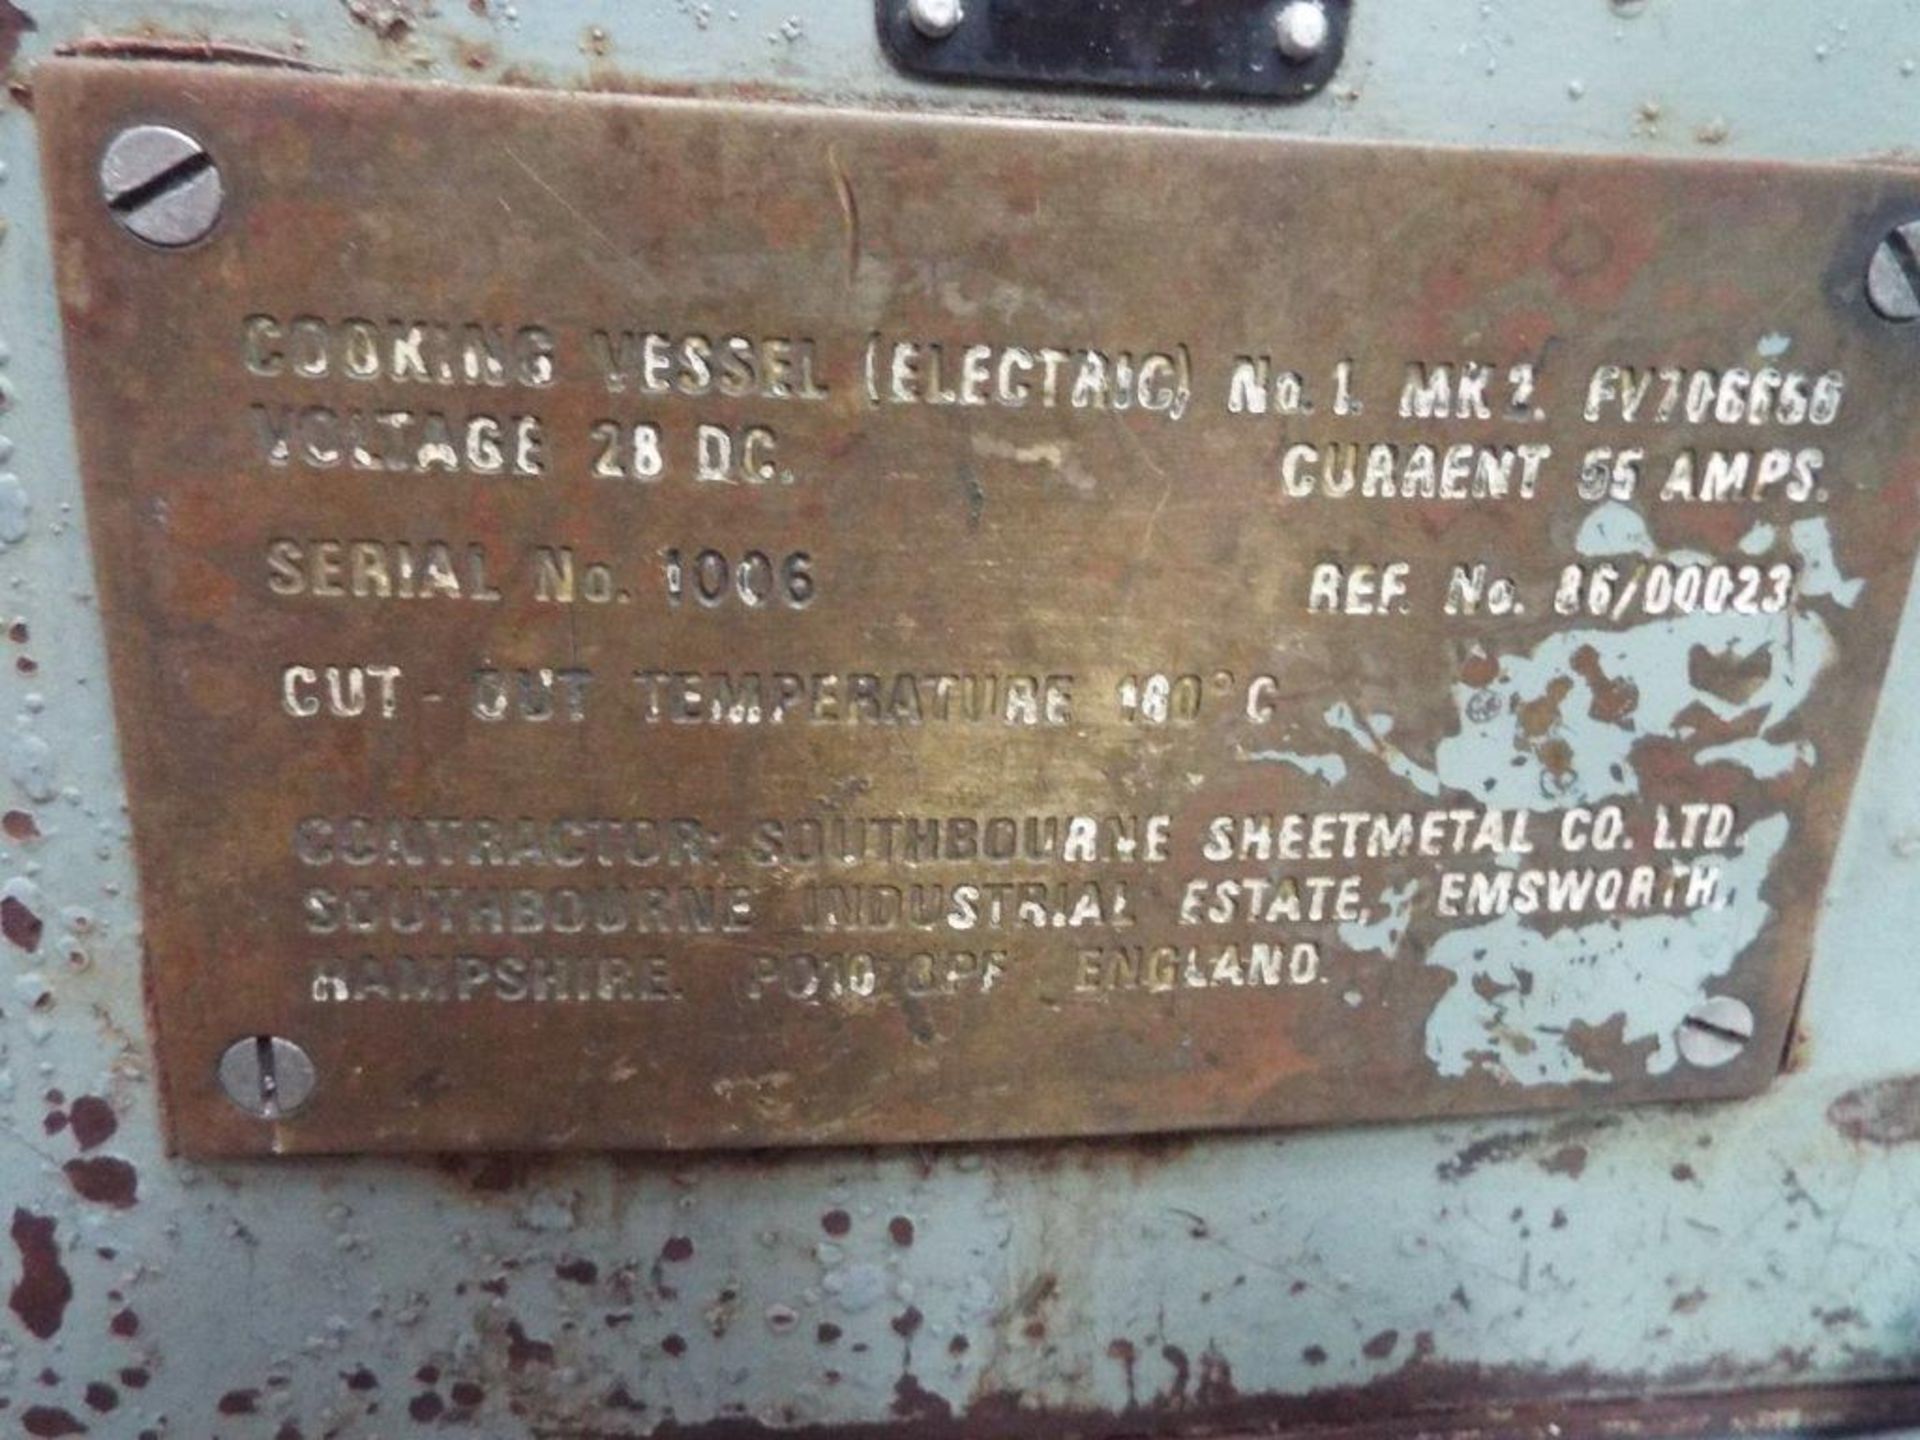 Approx 40 x Cooking Vessel (electric 24V) No 1 Mk 2 FV 706656 - Image 5 of 6